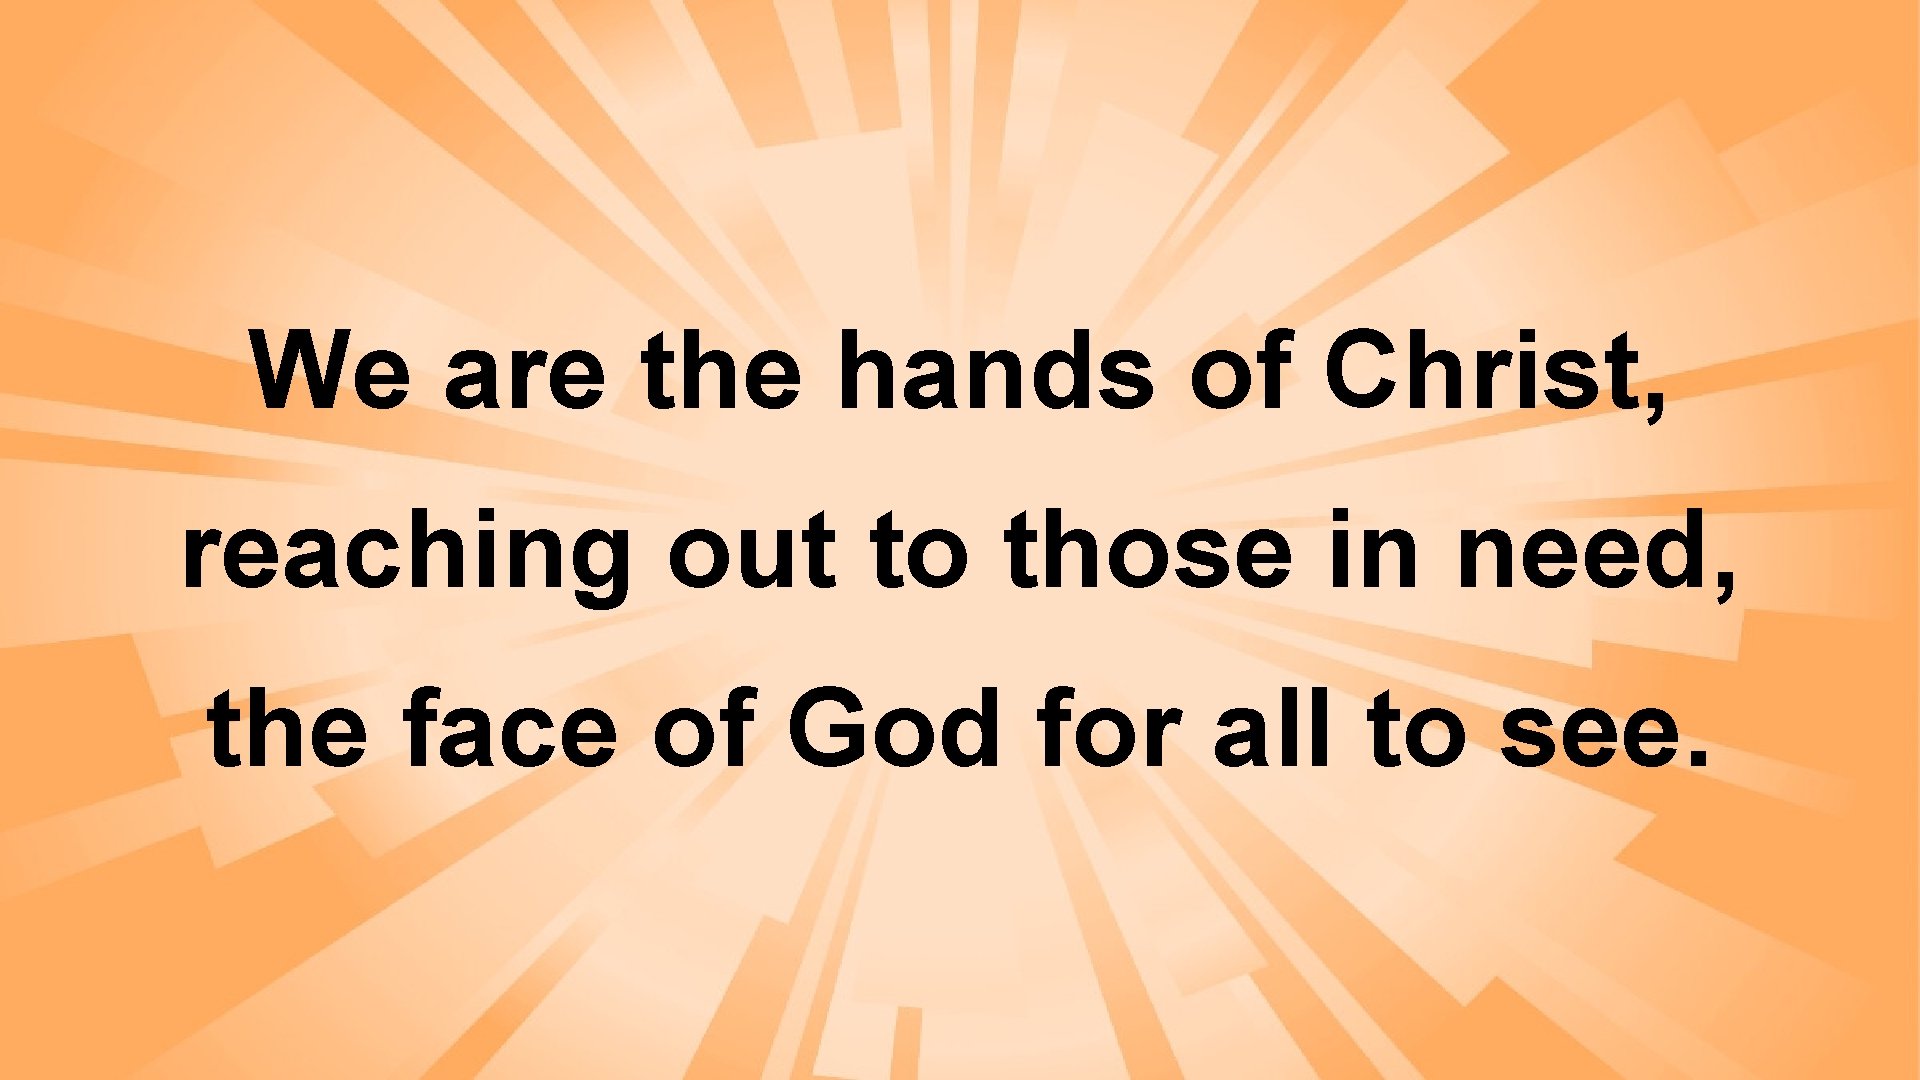 We are the hands of Christ, reaching out to those in need, the face